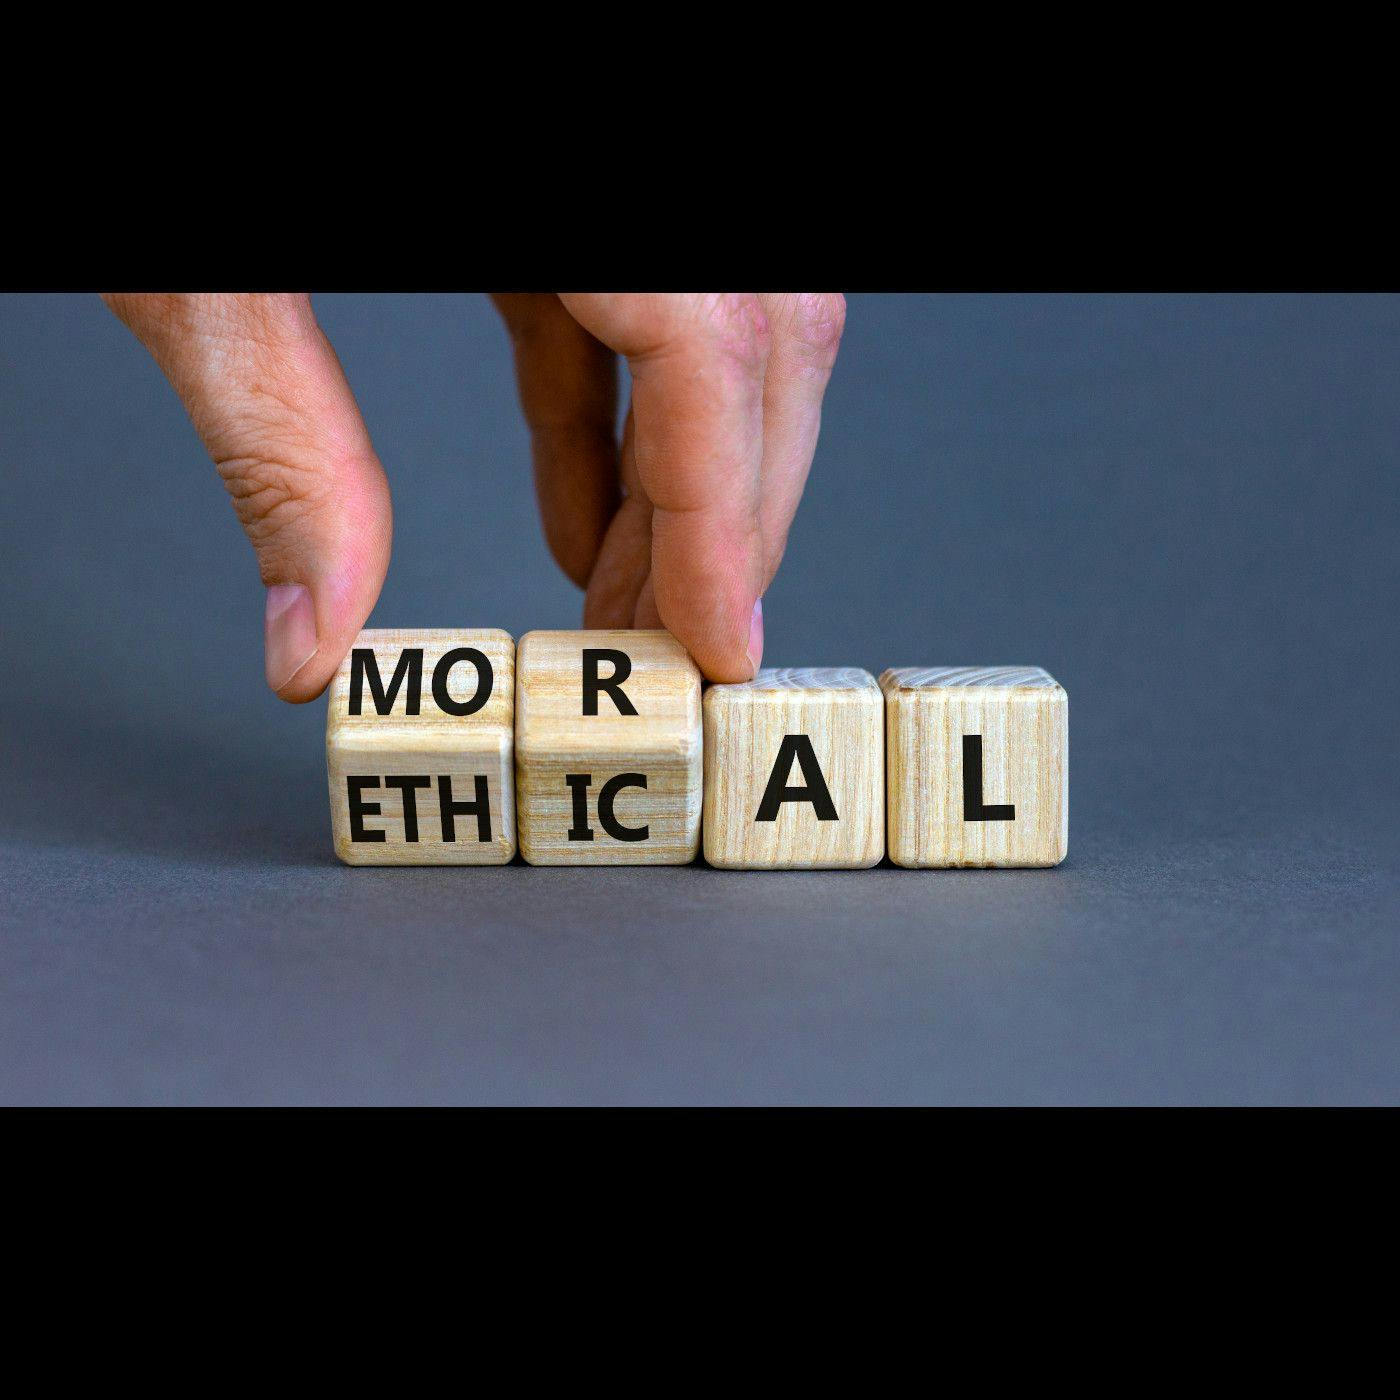 Ep. 389 - The Measurable Morality of Atheists